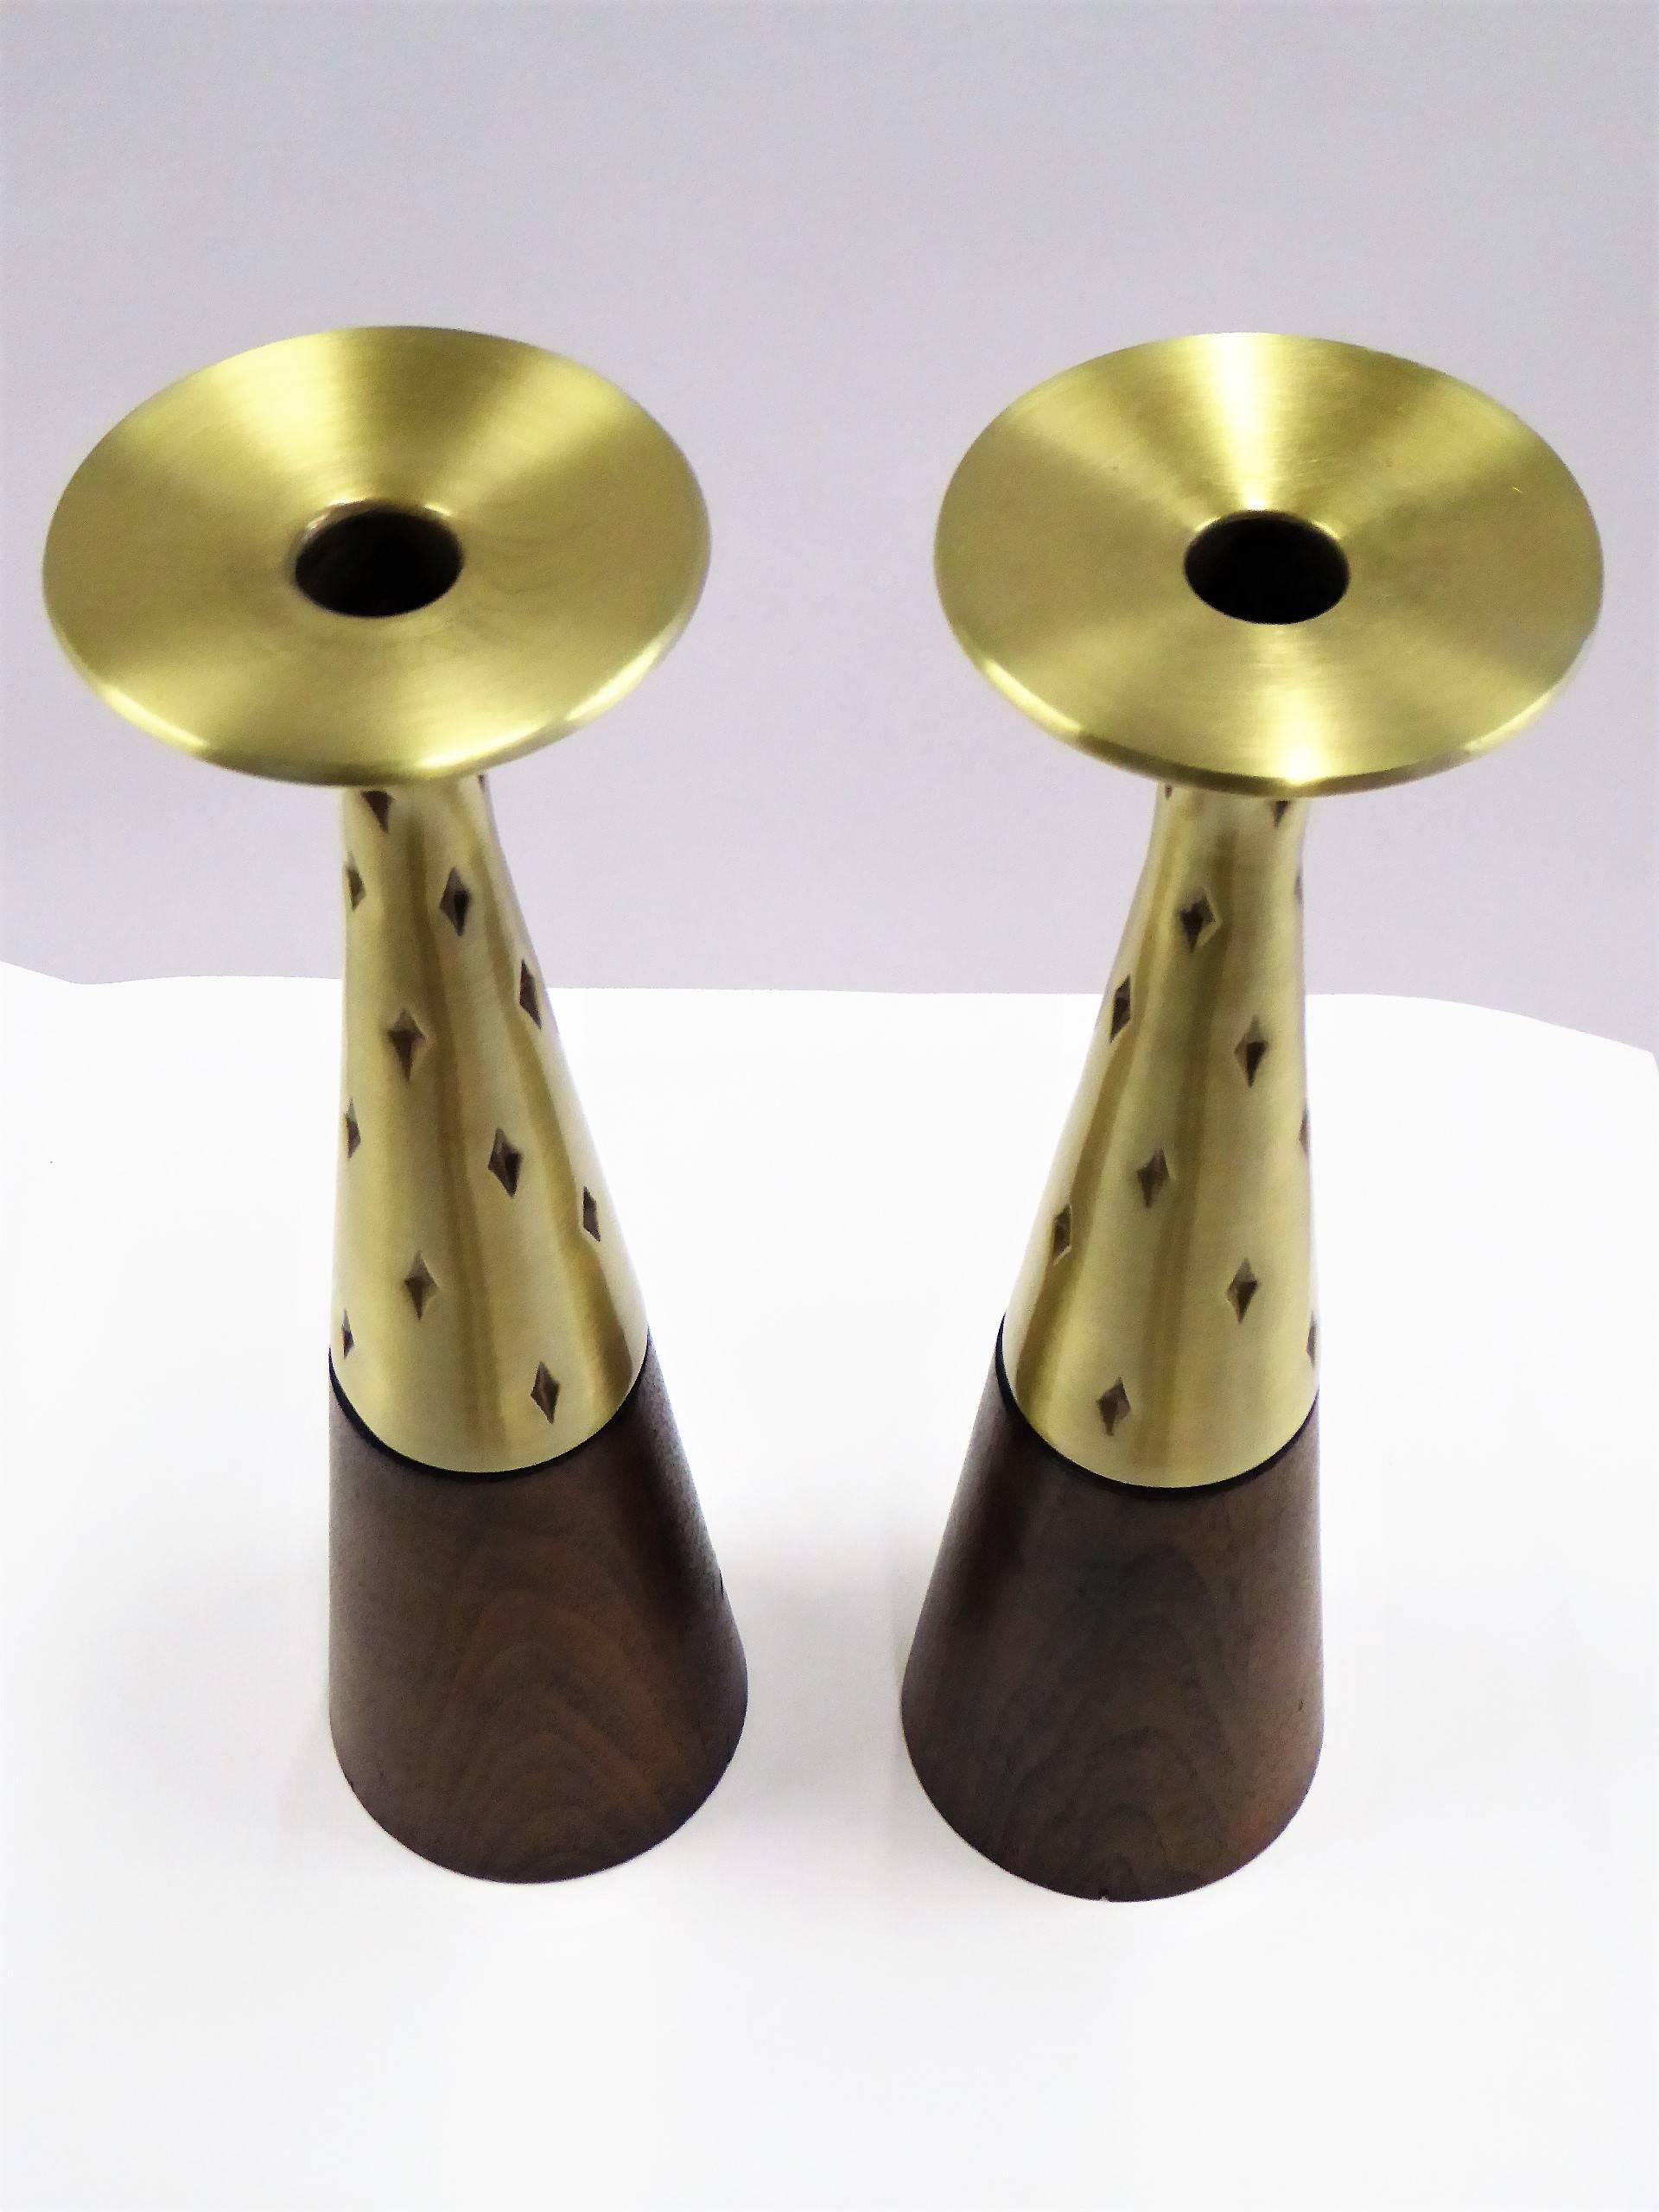 1950s midcentury Danish modern designed candlesticks by noted 20th century designer Tony Paul (1918-2010) for Westwood Chadwick in brass and walnut. With a modern tapered form, the brass with impressed diamond shapes. Brass re-polished, walnut